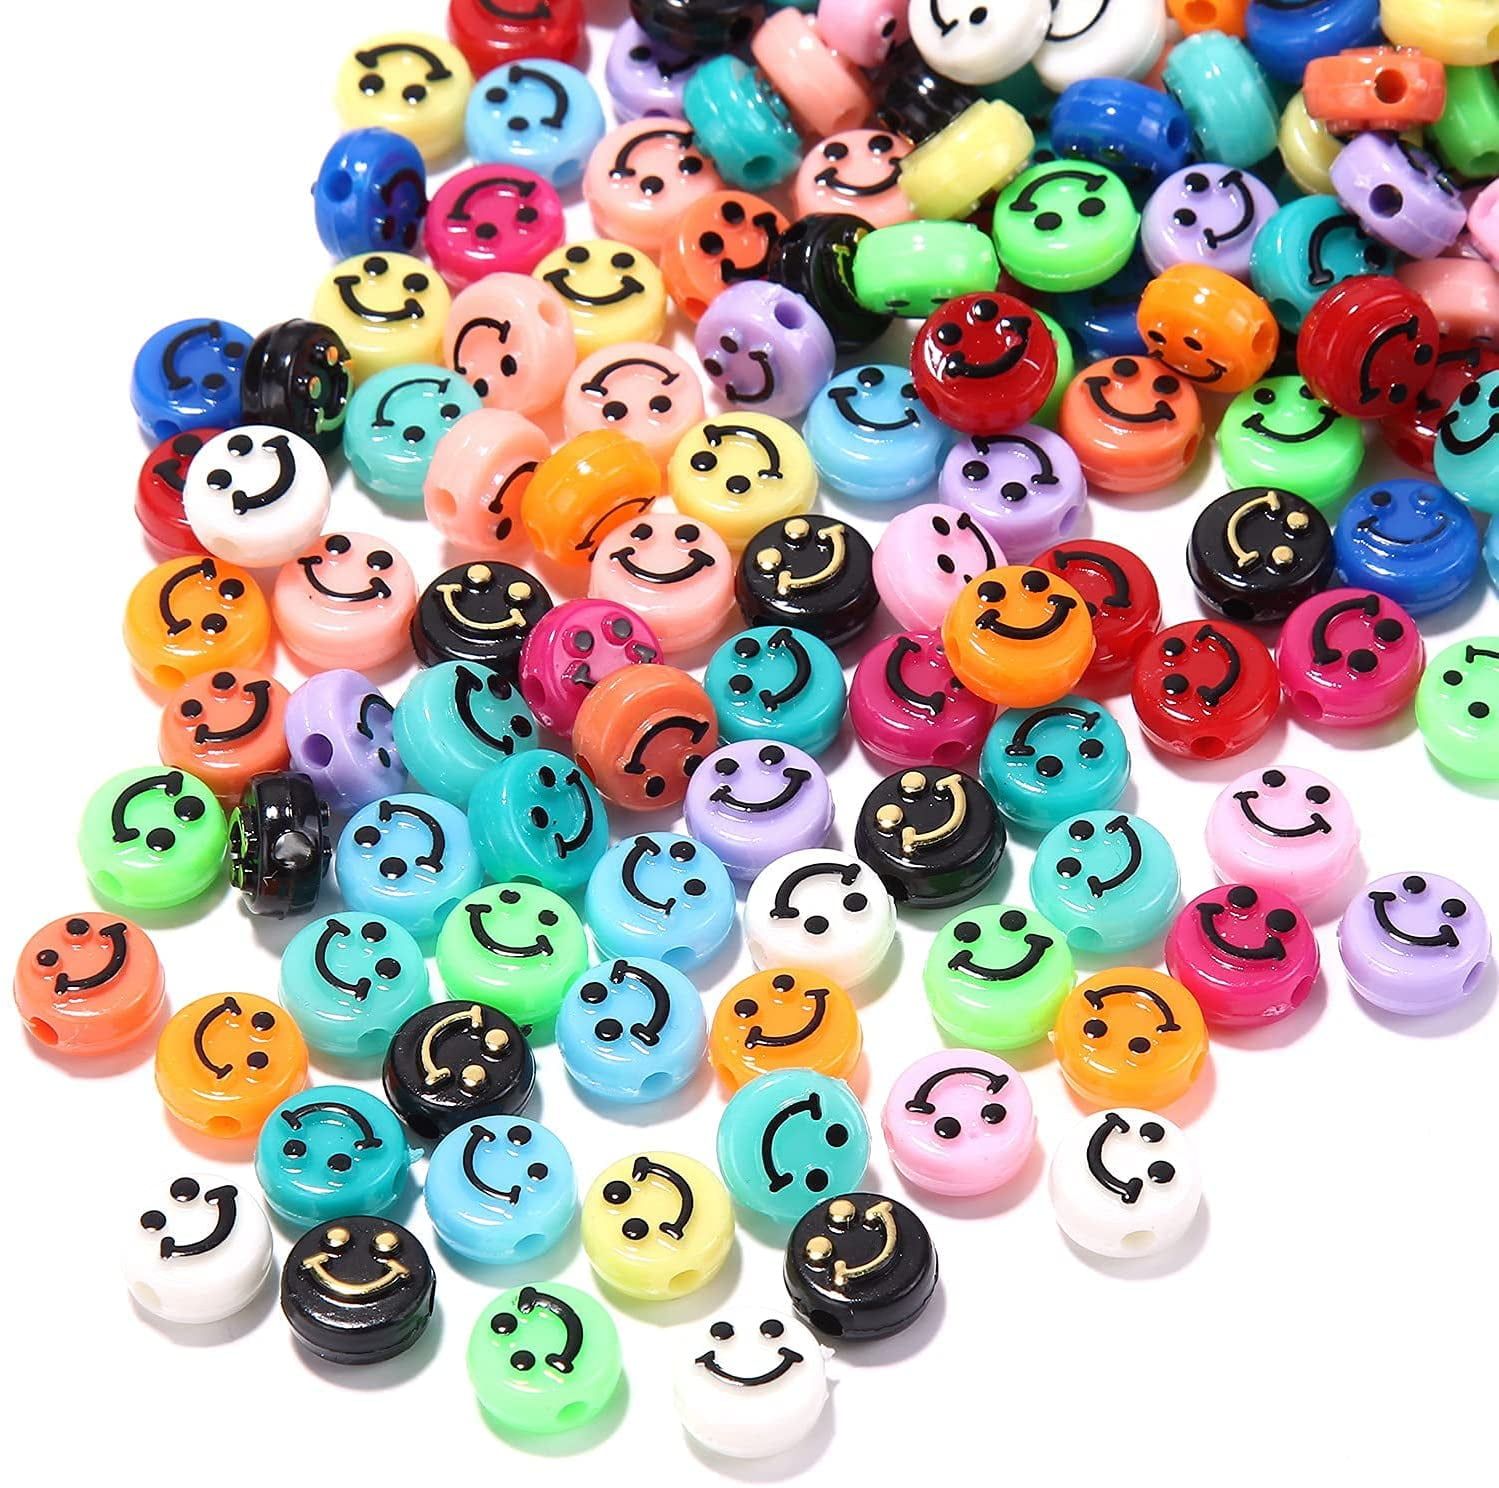 10mm Acrylic Round Happy Face Loose Spacer Beads Colorful Smiley Face Charms for Jewelry Making Bracelet Earring Necklace DIY Craft Supplies Hair Accessories 300Pcs Smiley Face Beads